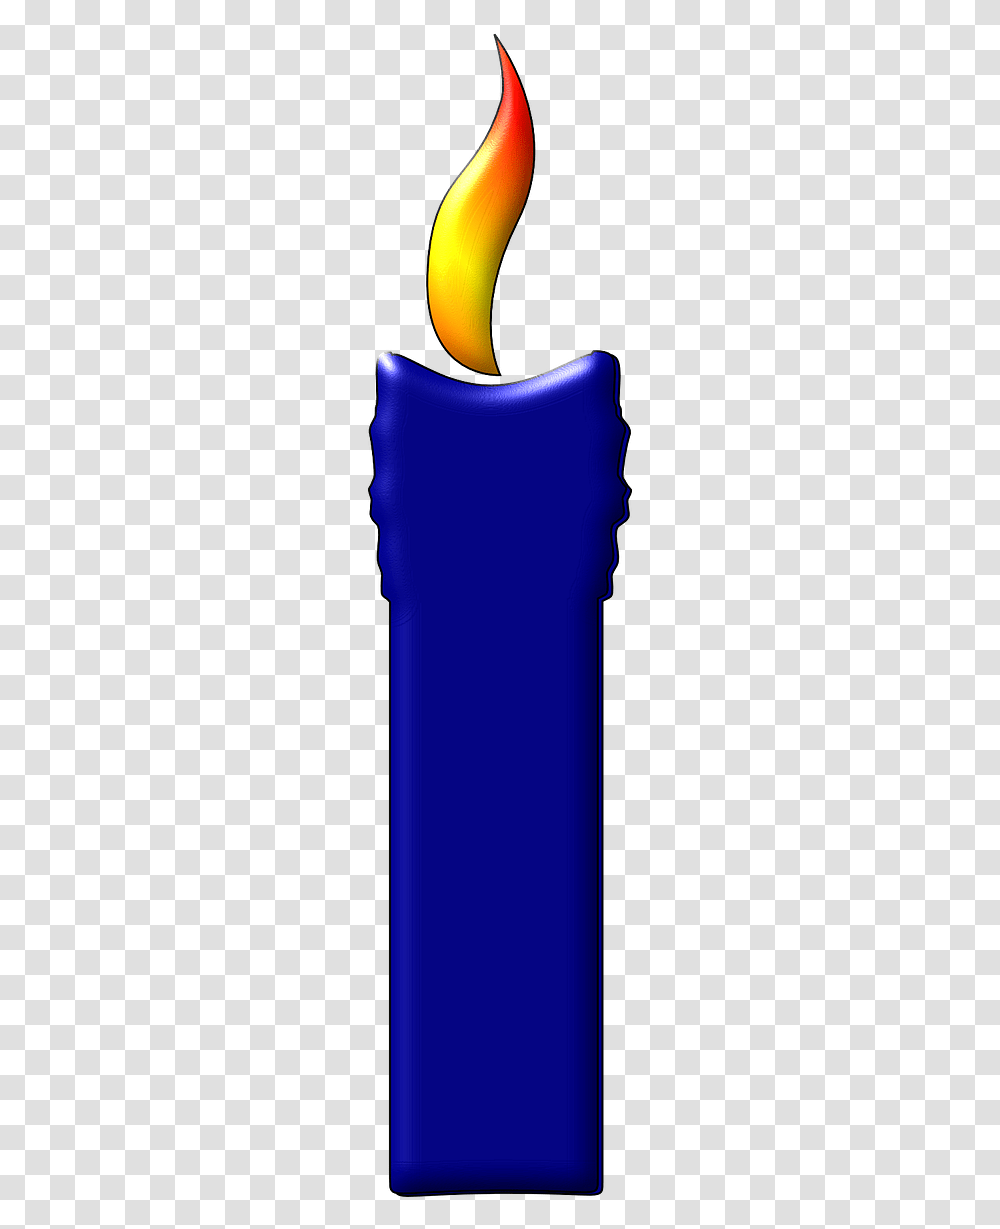 Flame, Bottle, Tin, Can Transparent Png